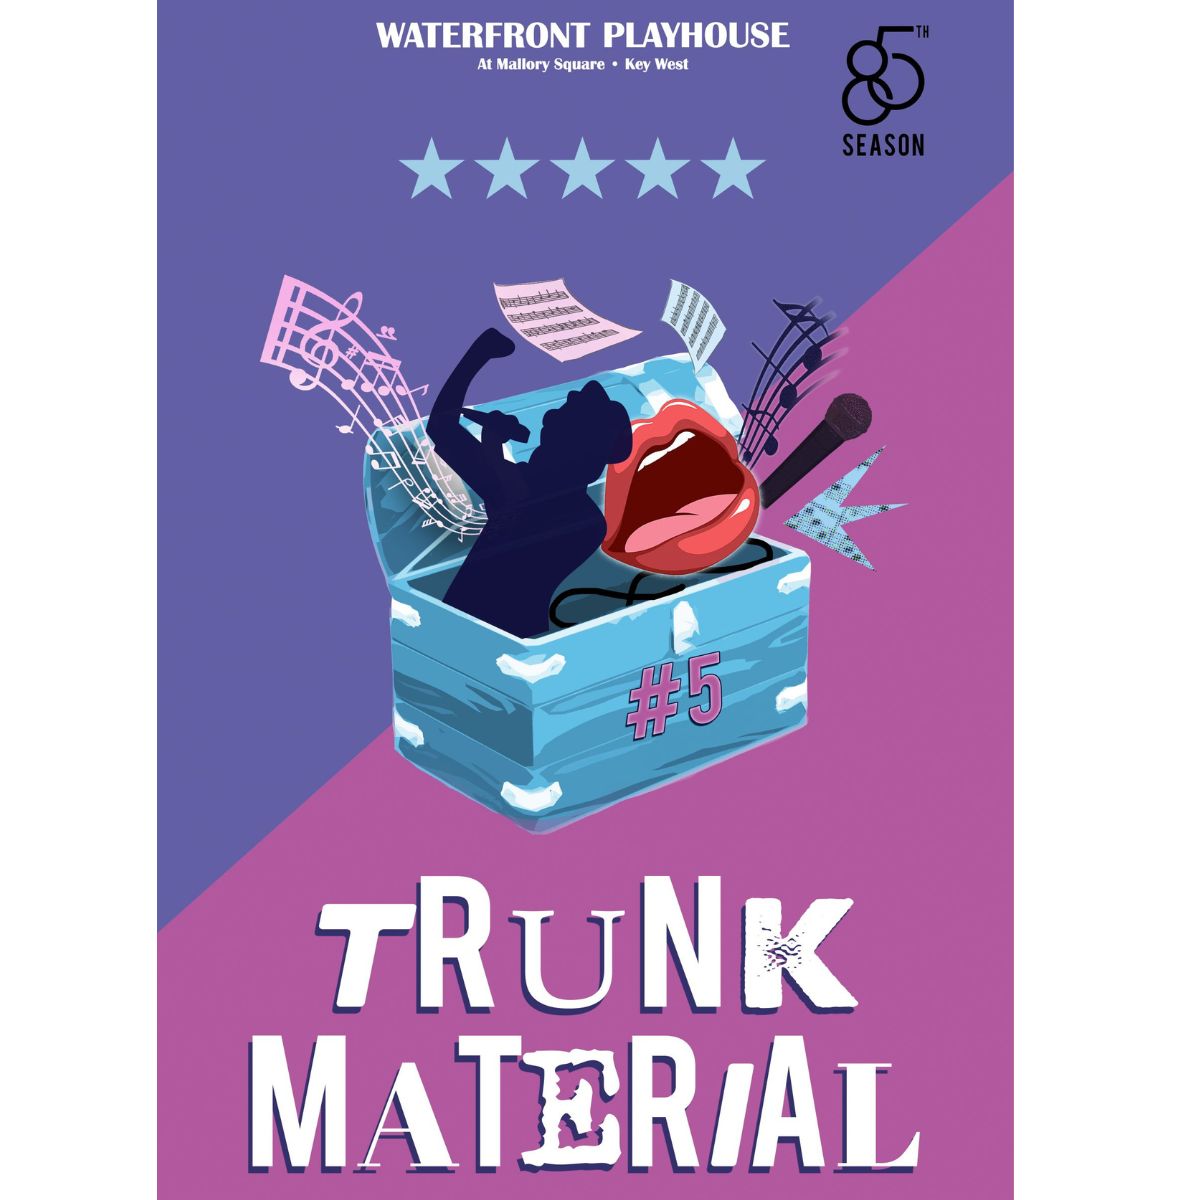 Trunk Material 5 at the Waterfront Playhouse